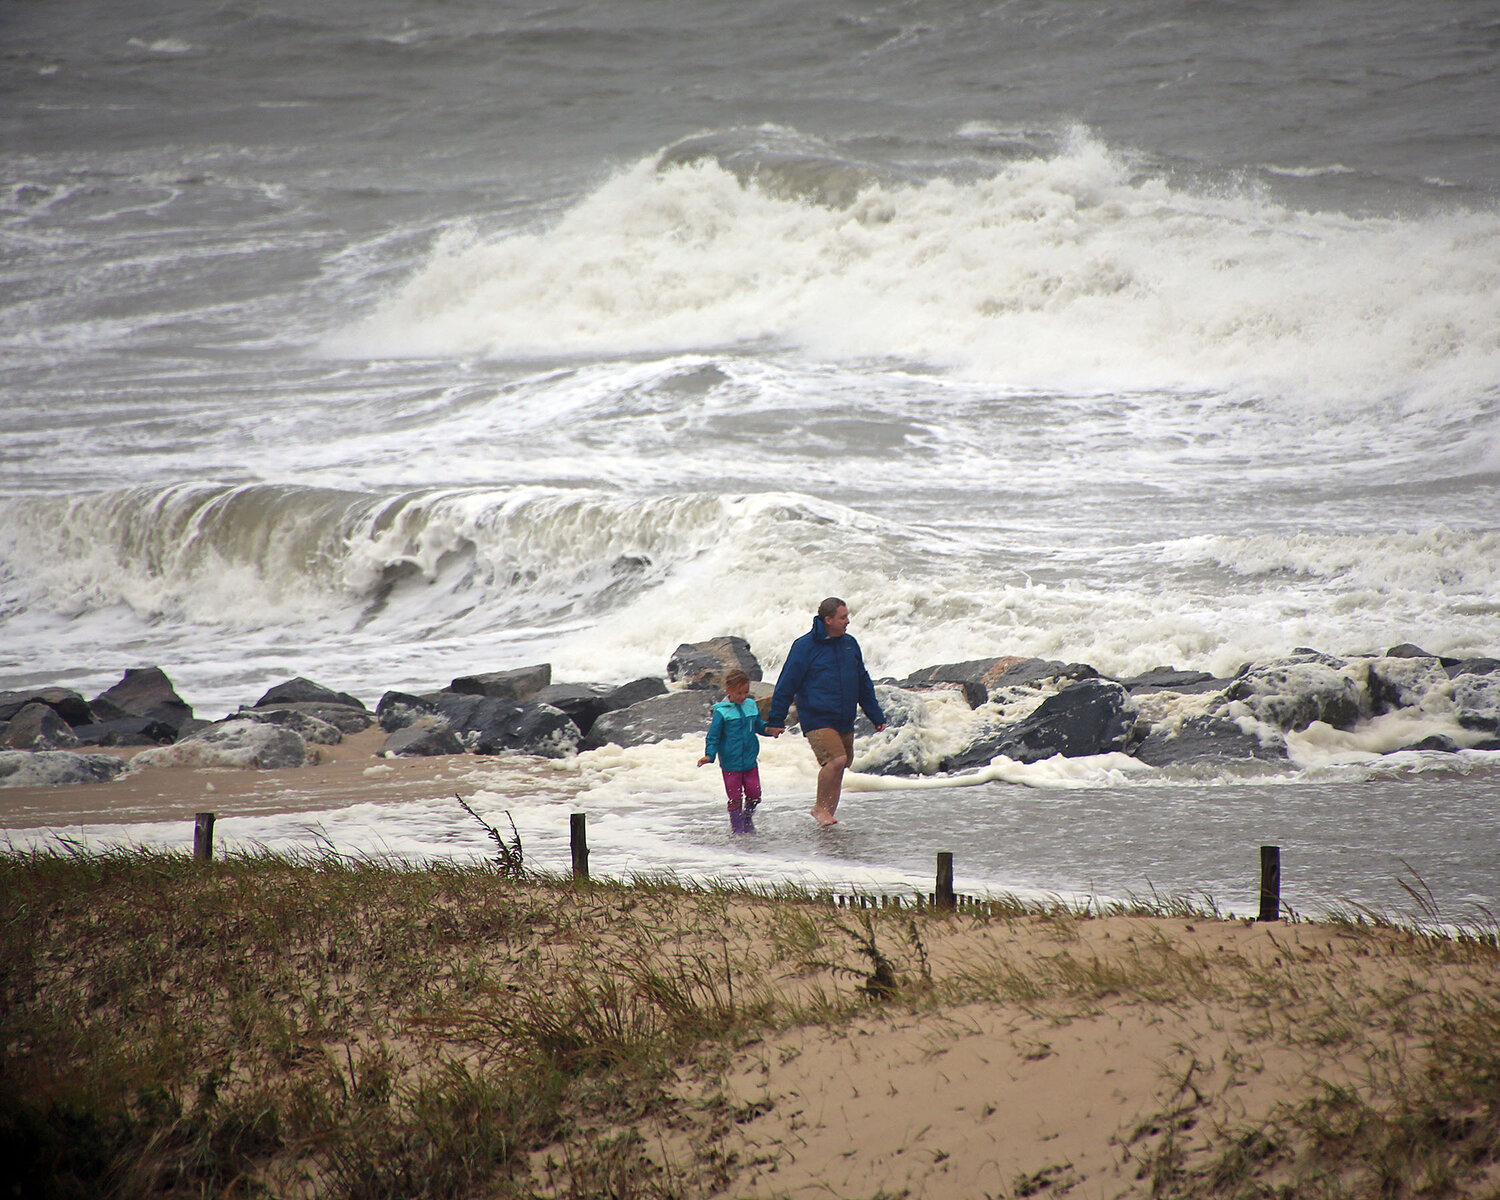 Visitors to Cape Henlopen State Park experienced high winds and spectacular waves Saturday afternoon at high tide.